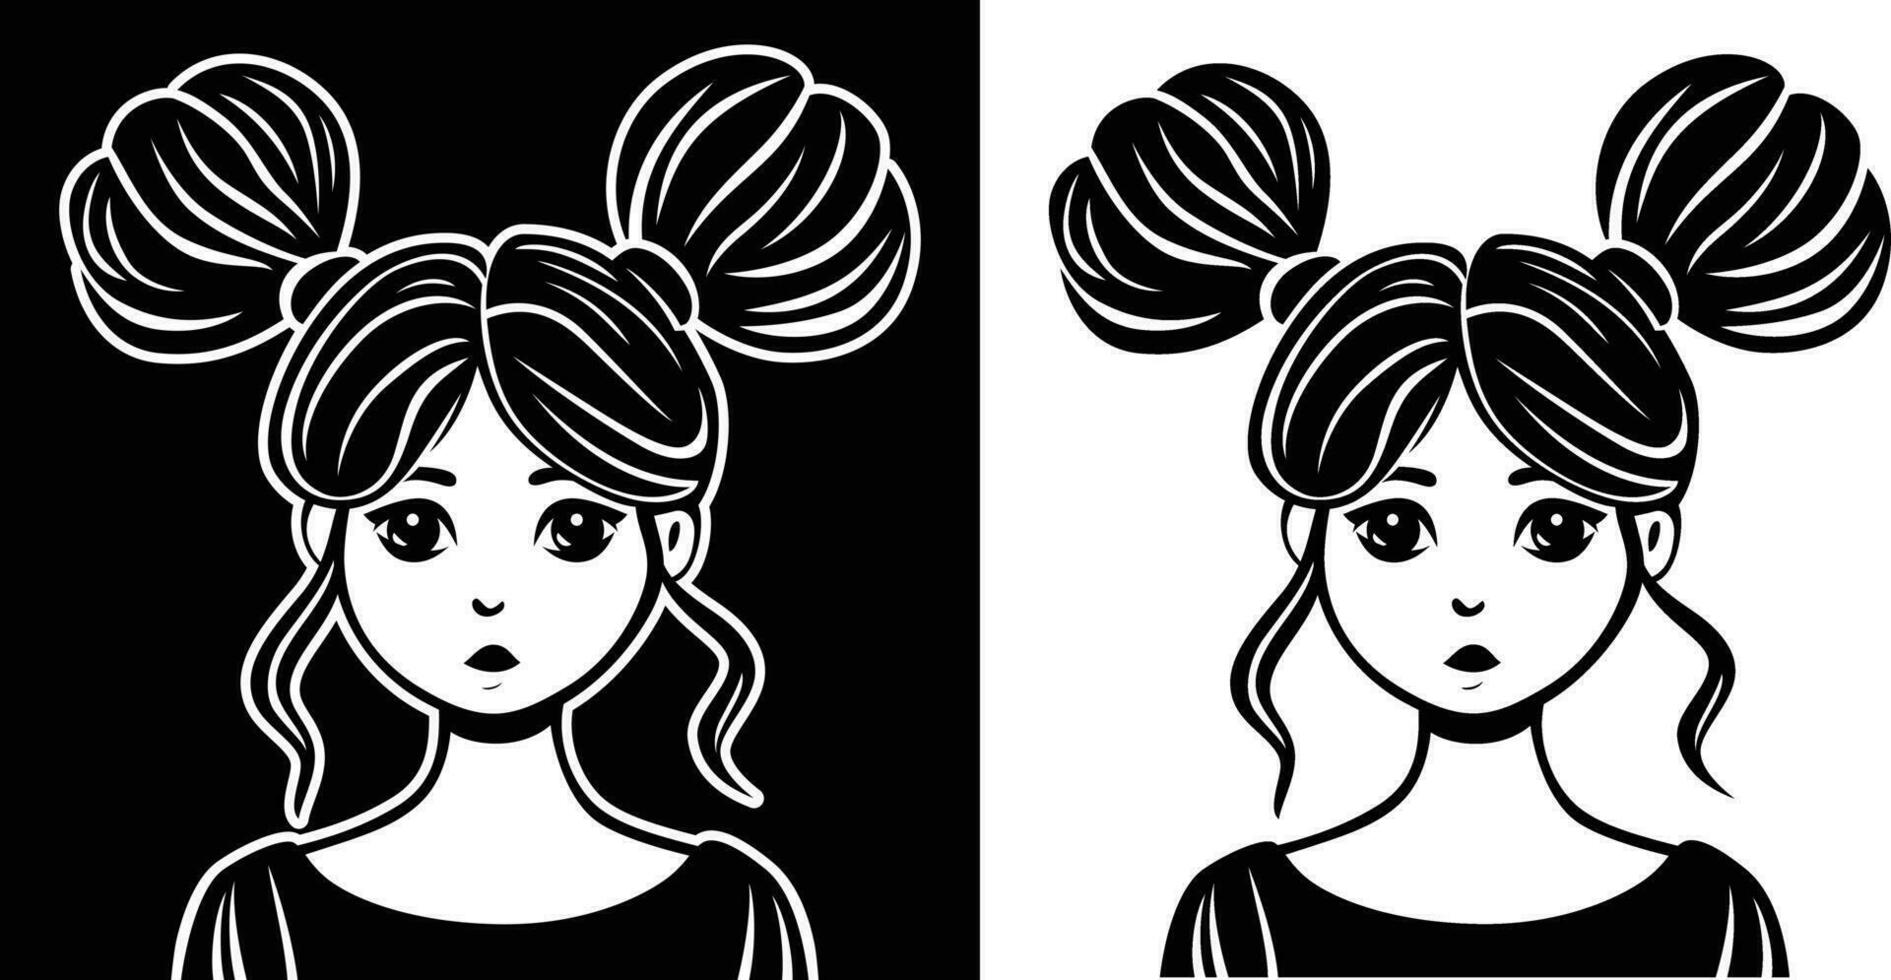 Girl with two hair buns vector illustration, Cute girl with Space buns, two hair buns on top of head black and white stock vector image